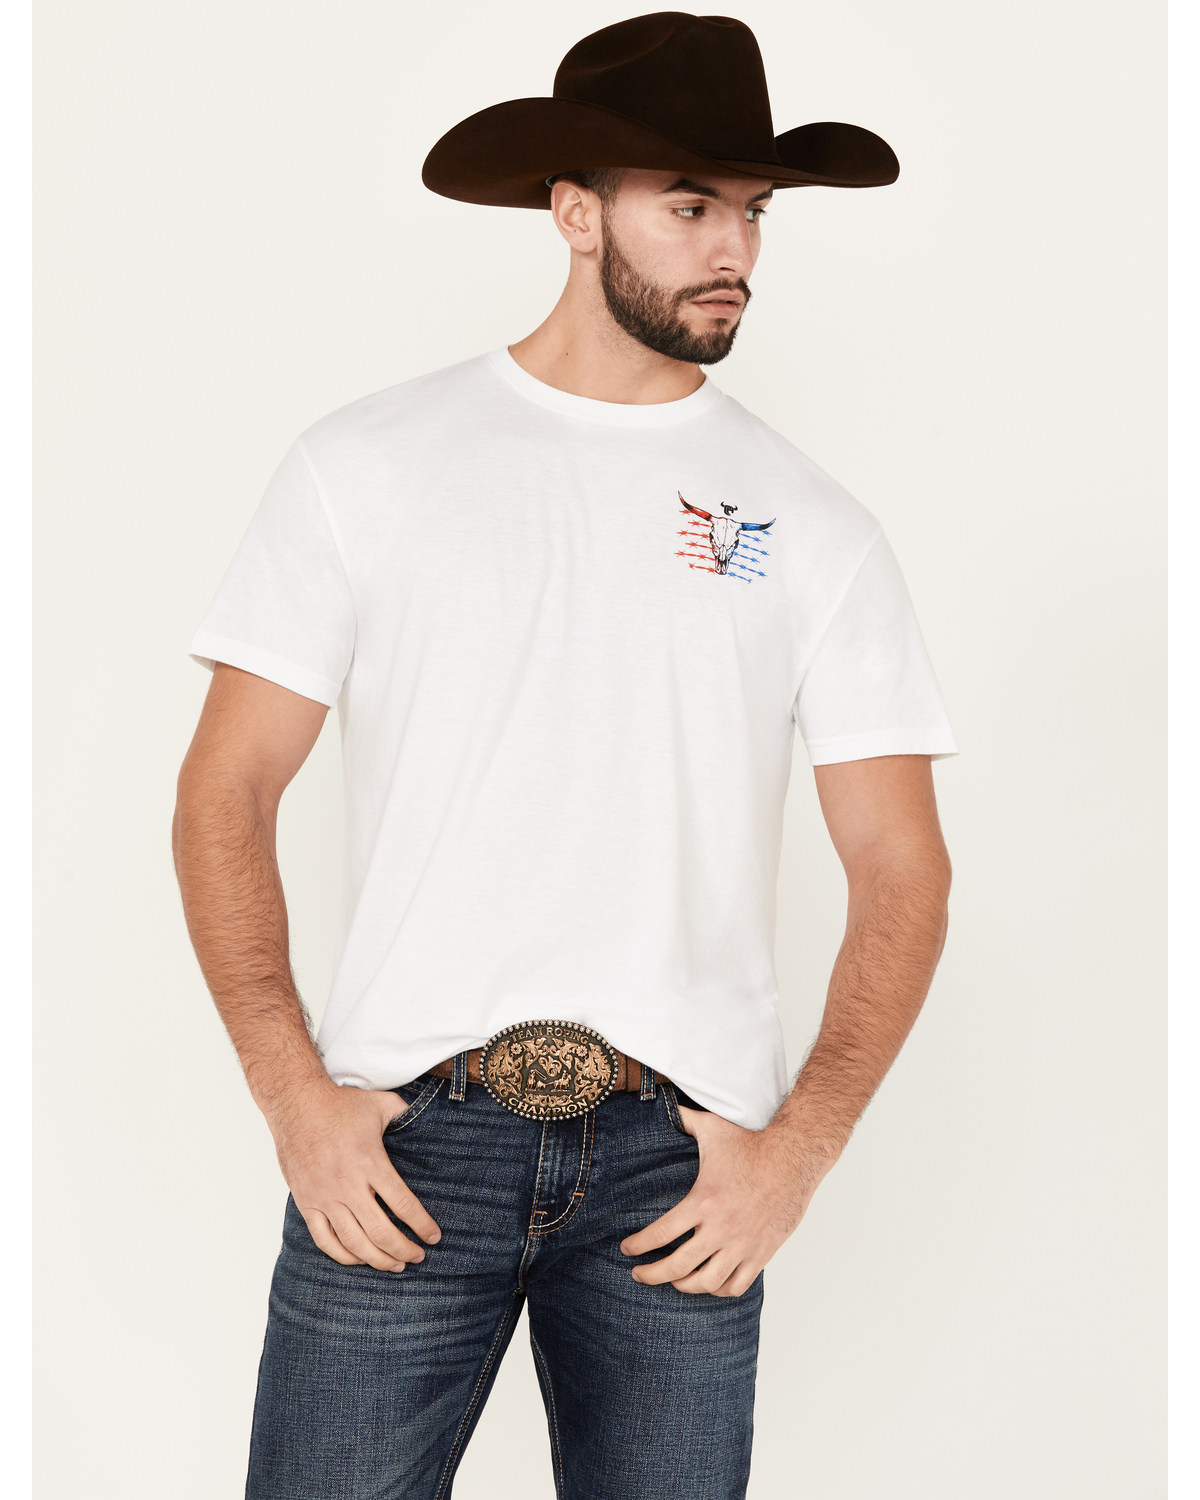 Cowboy Hardware Men's Boot Barn Exclusive Live Free Short Sleeve Graphic T-Shirt